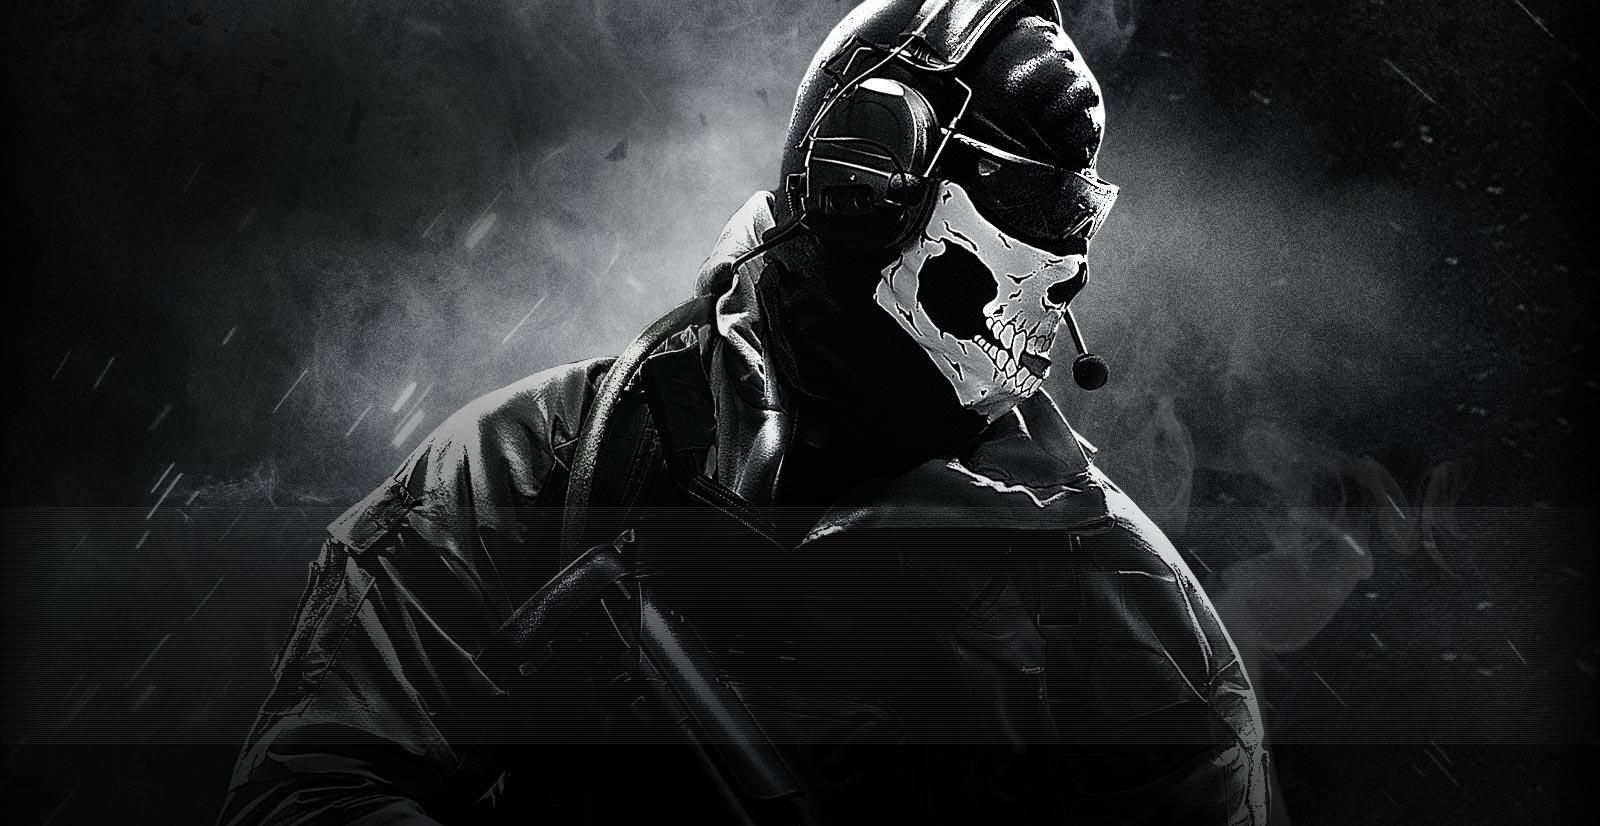 Call of Duty Ghosts' Season Pass details revealed!